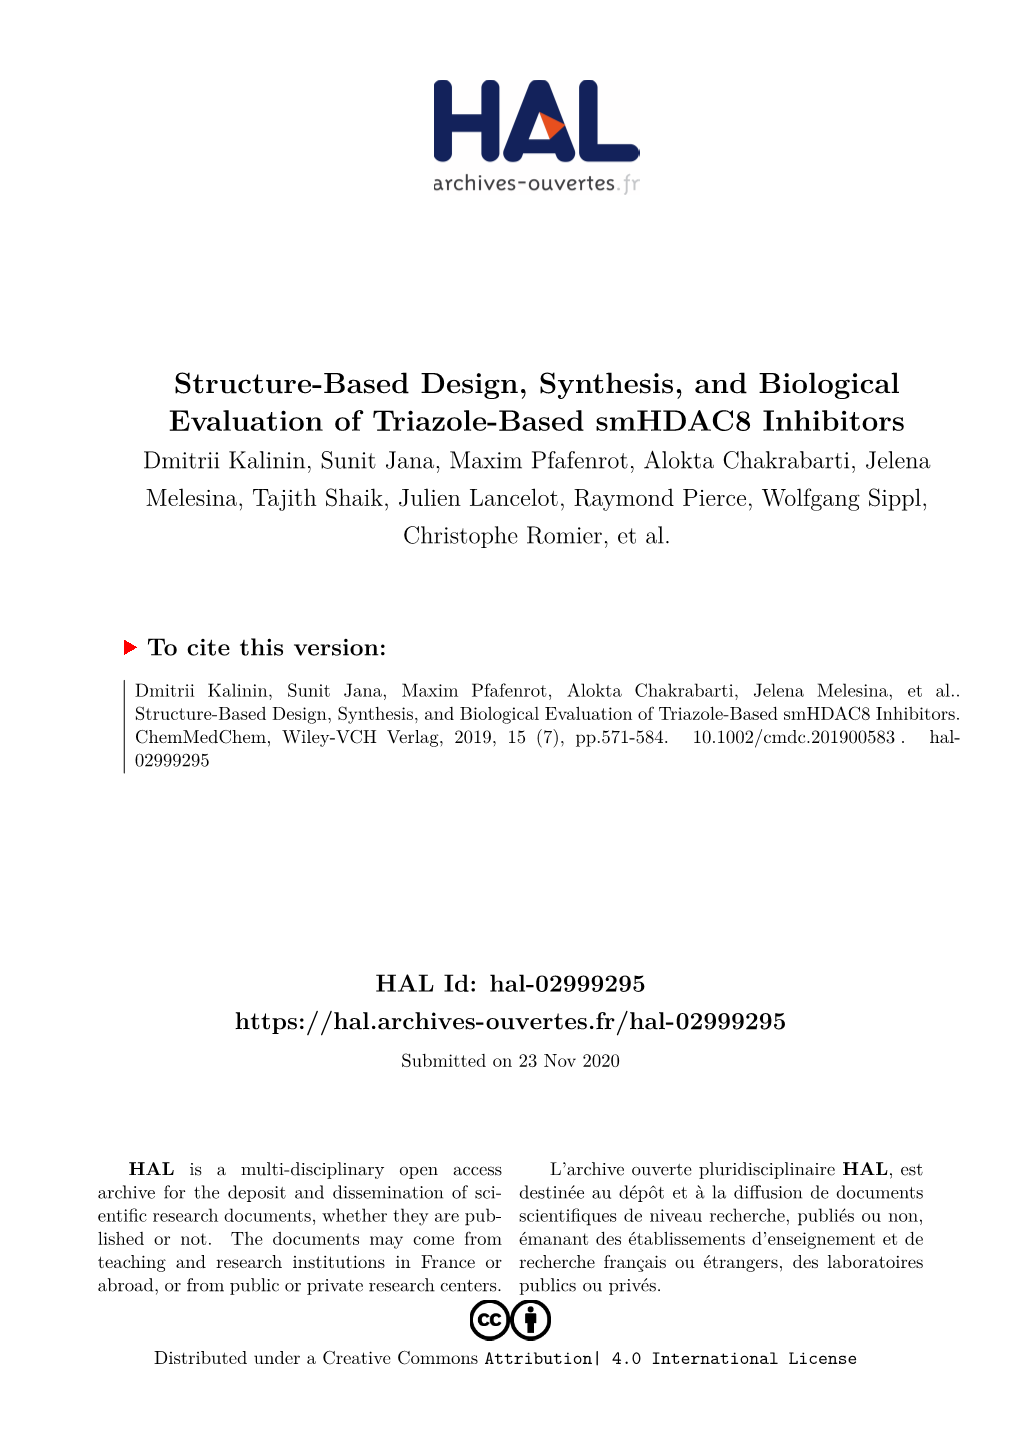 Structure-Based Design, Synthesis, and Biological Evaluation Of